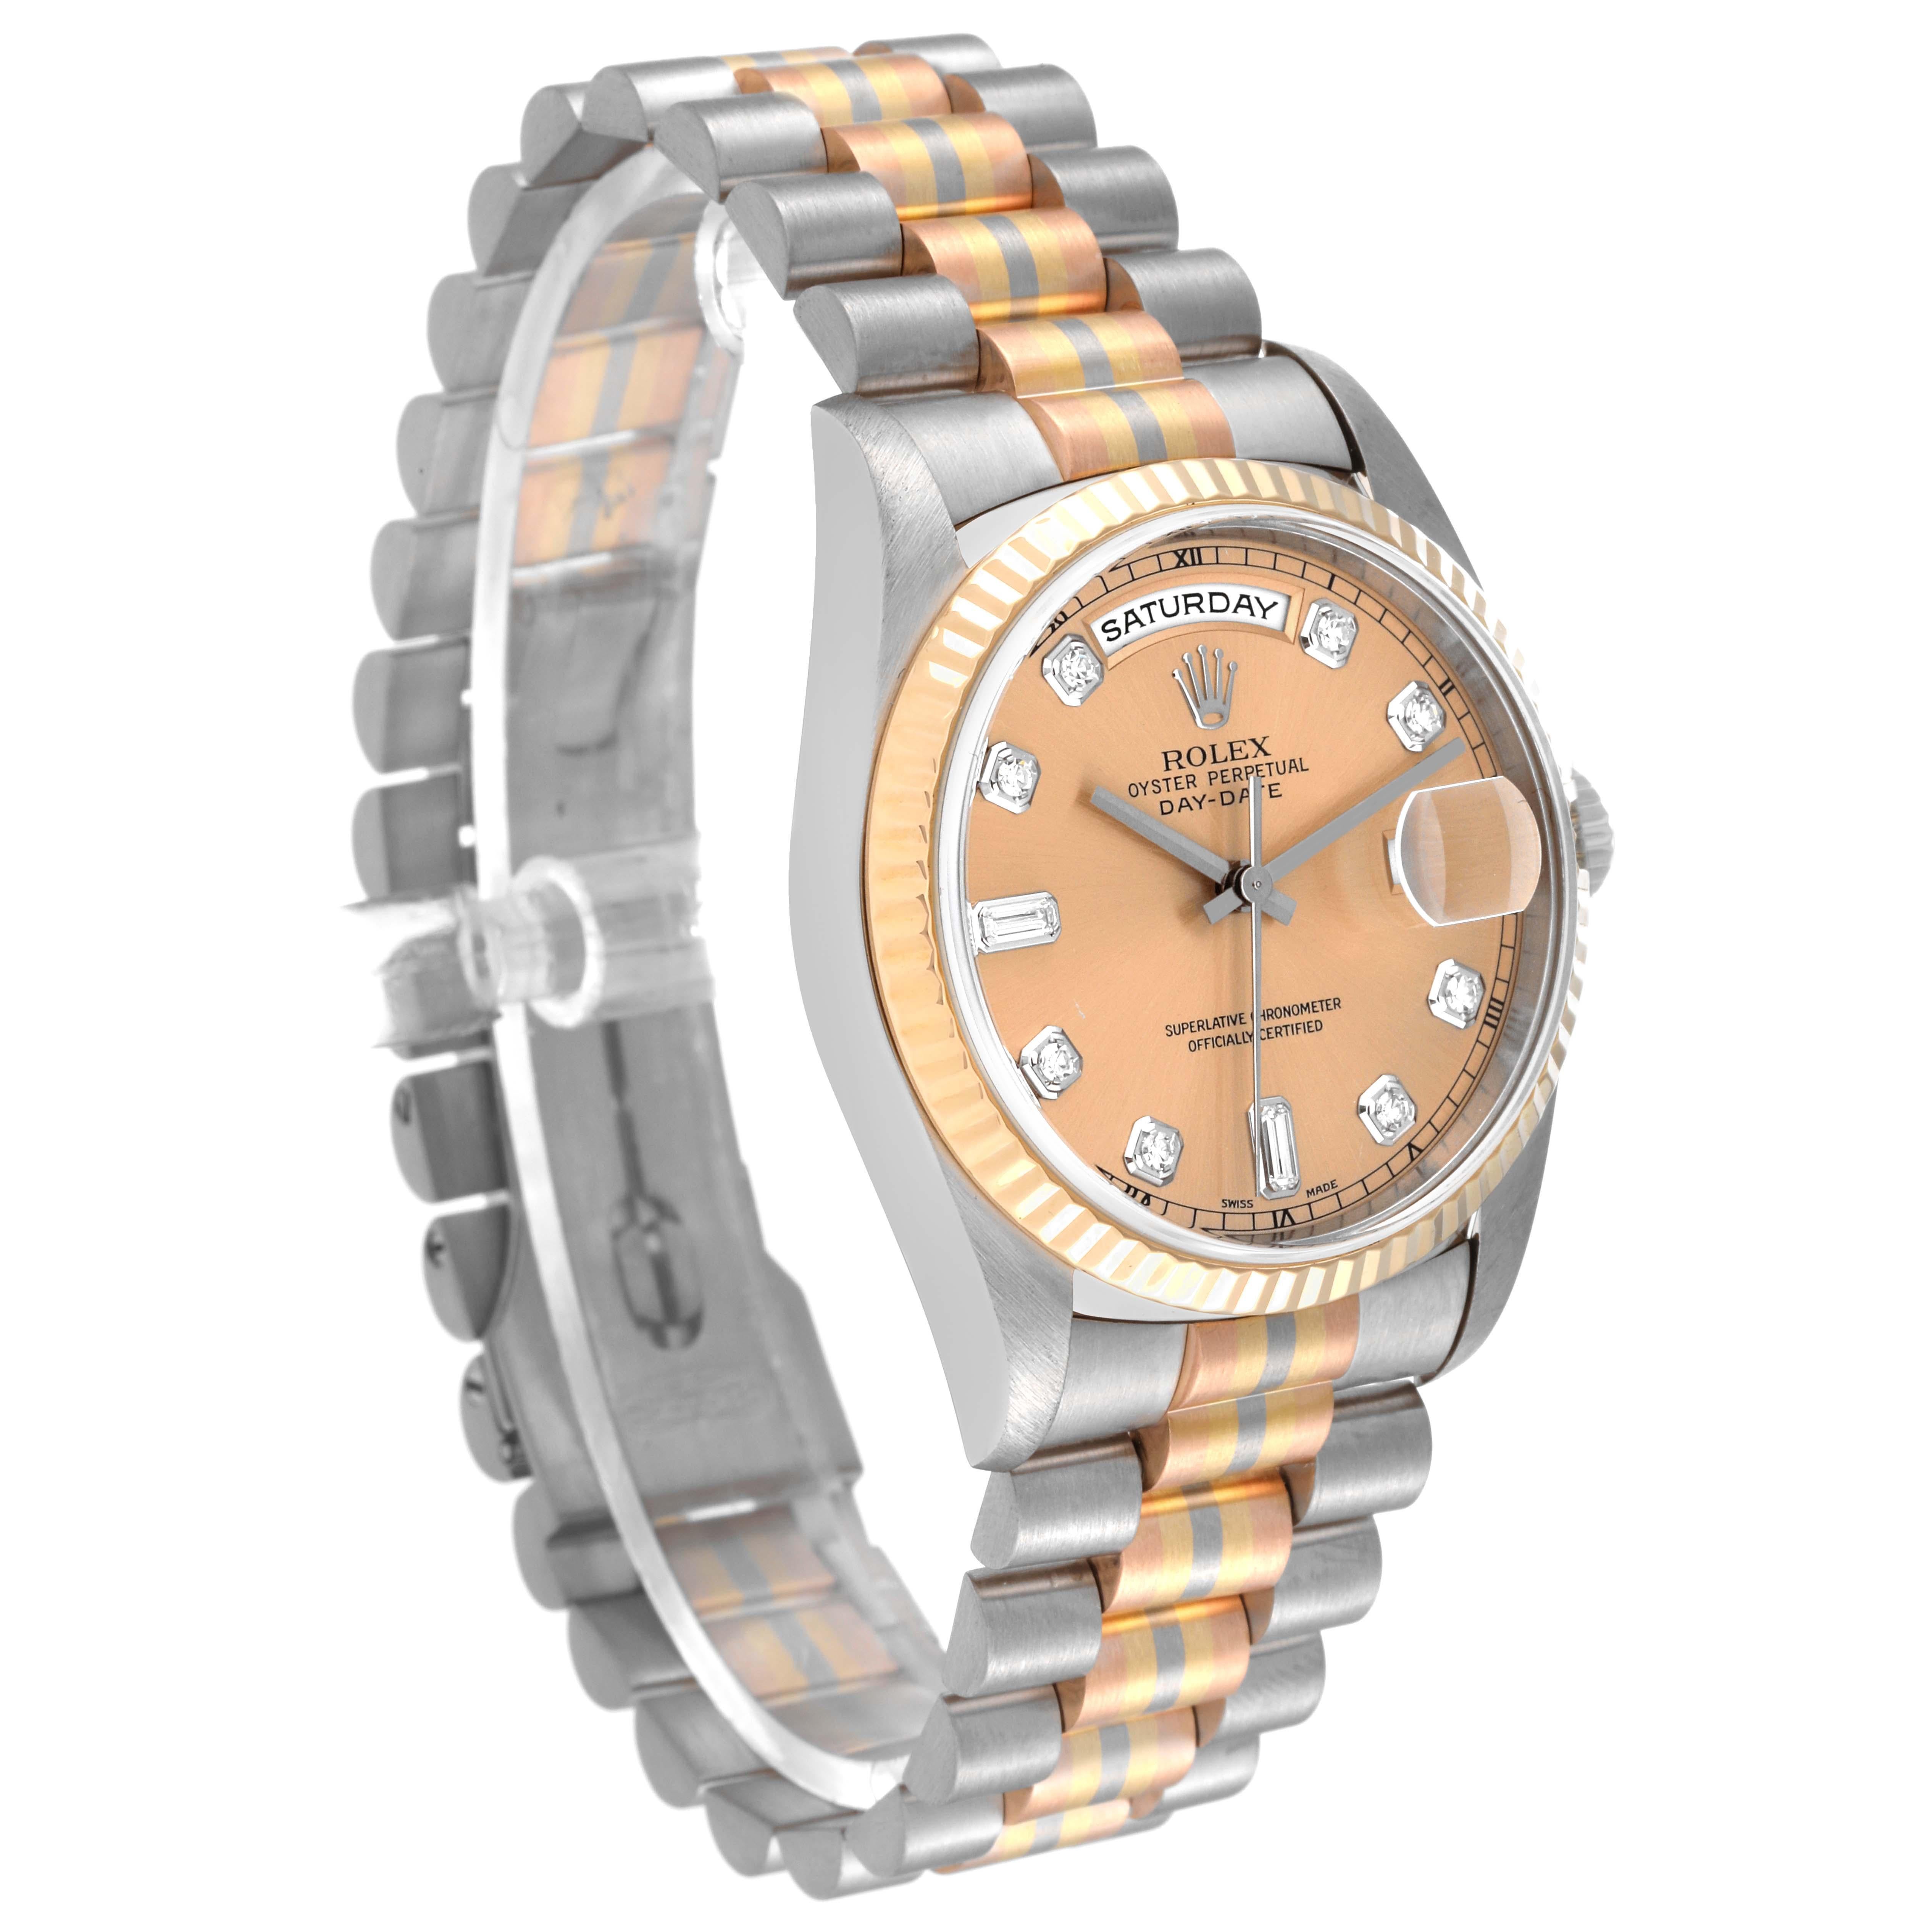 Rolex President Day-Date Tridor White Yellow Rose Gold Diamond Mens Watch 18239 In Excellent Condition For Sale In Atlanta, GA